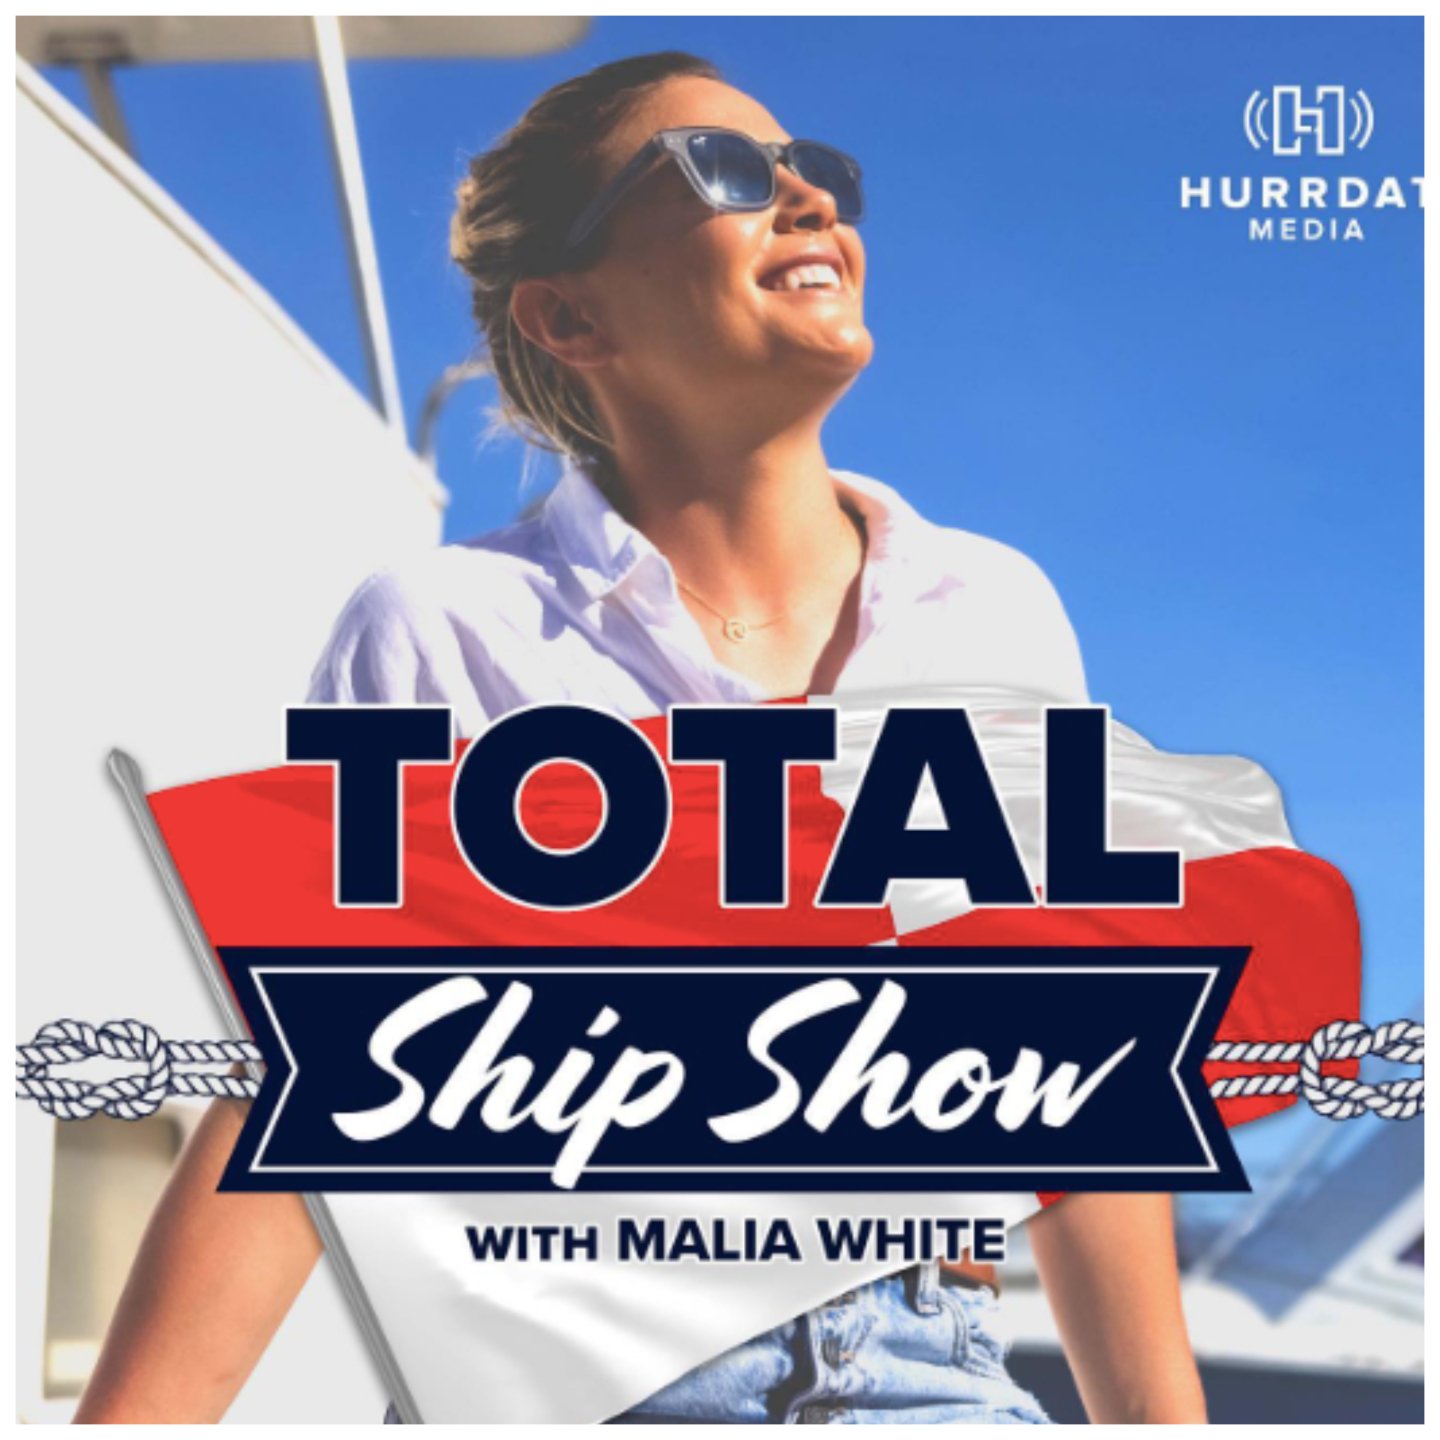 Malia White smiles in front of the 'Total Ship Show' logo